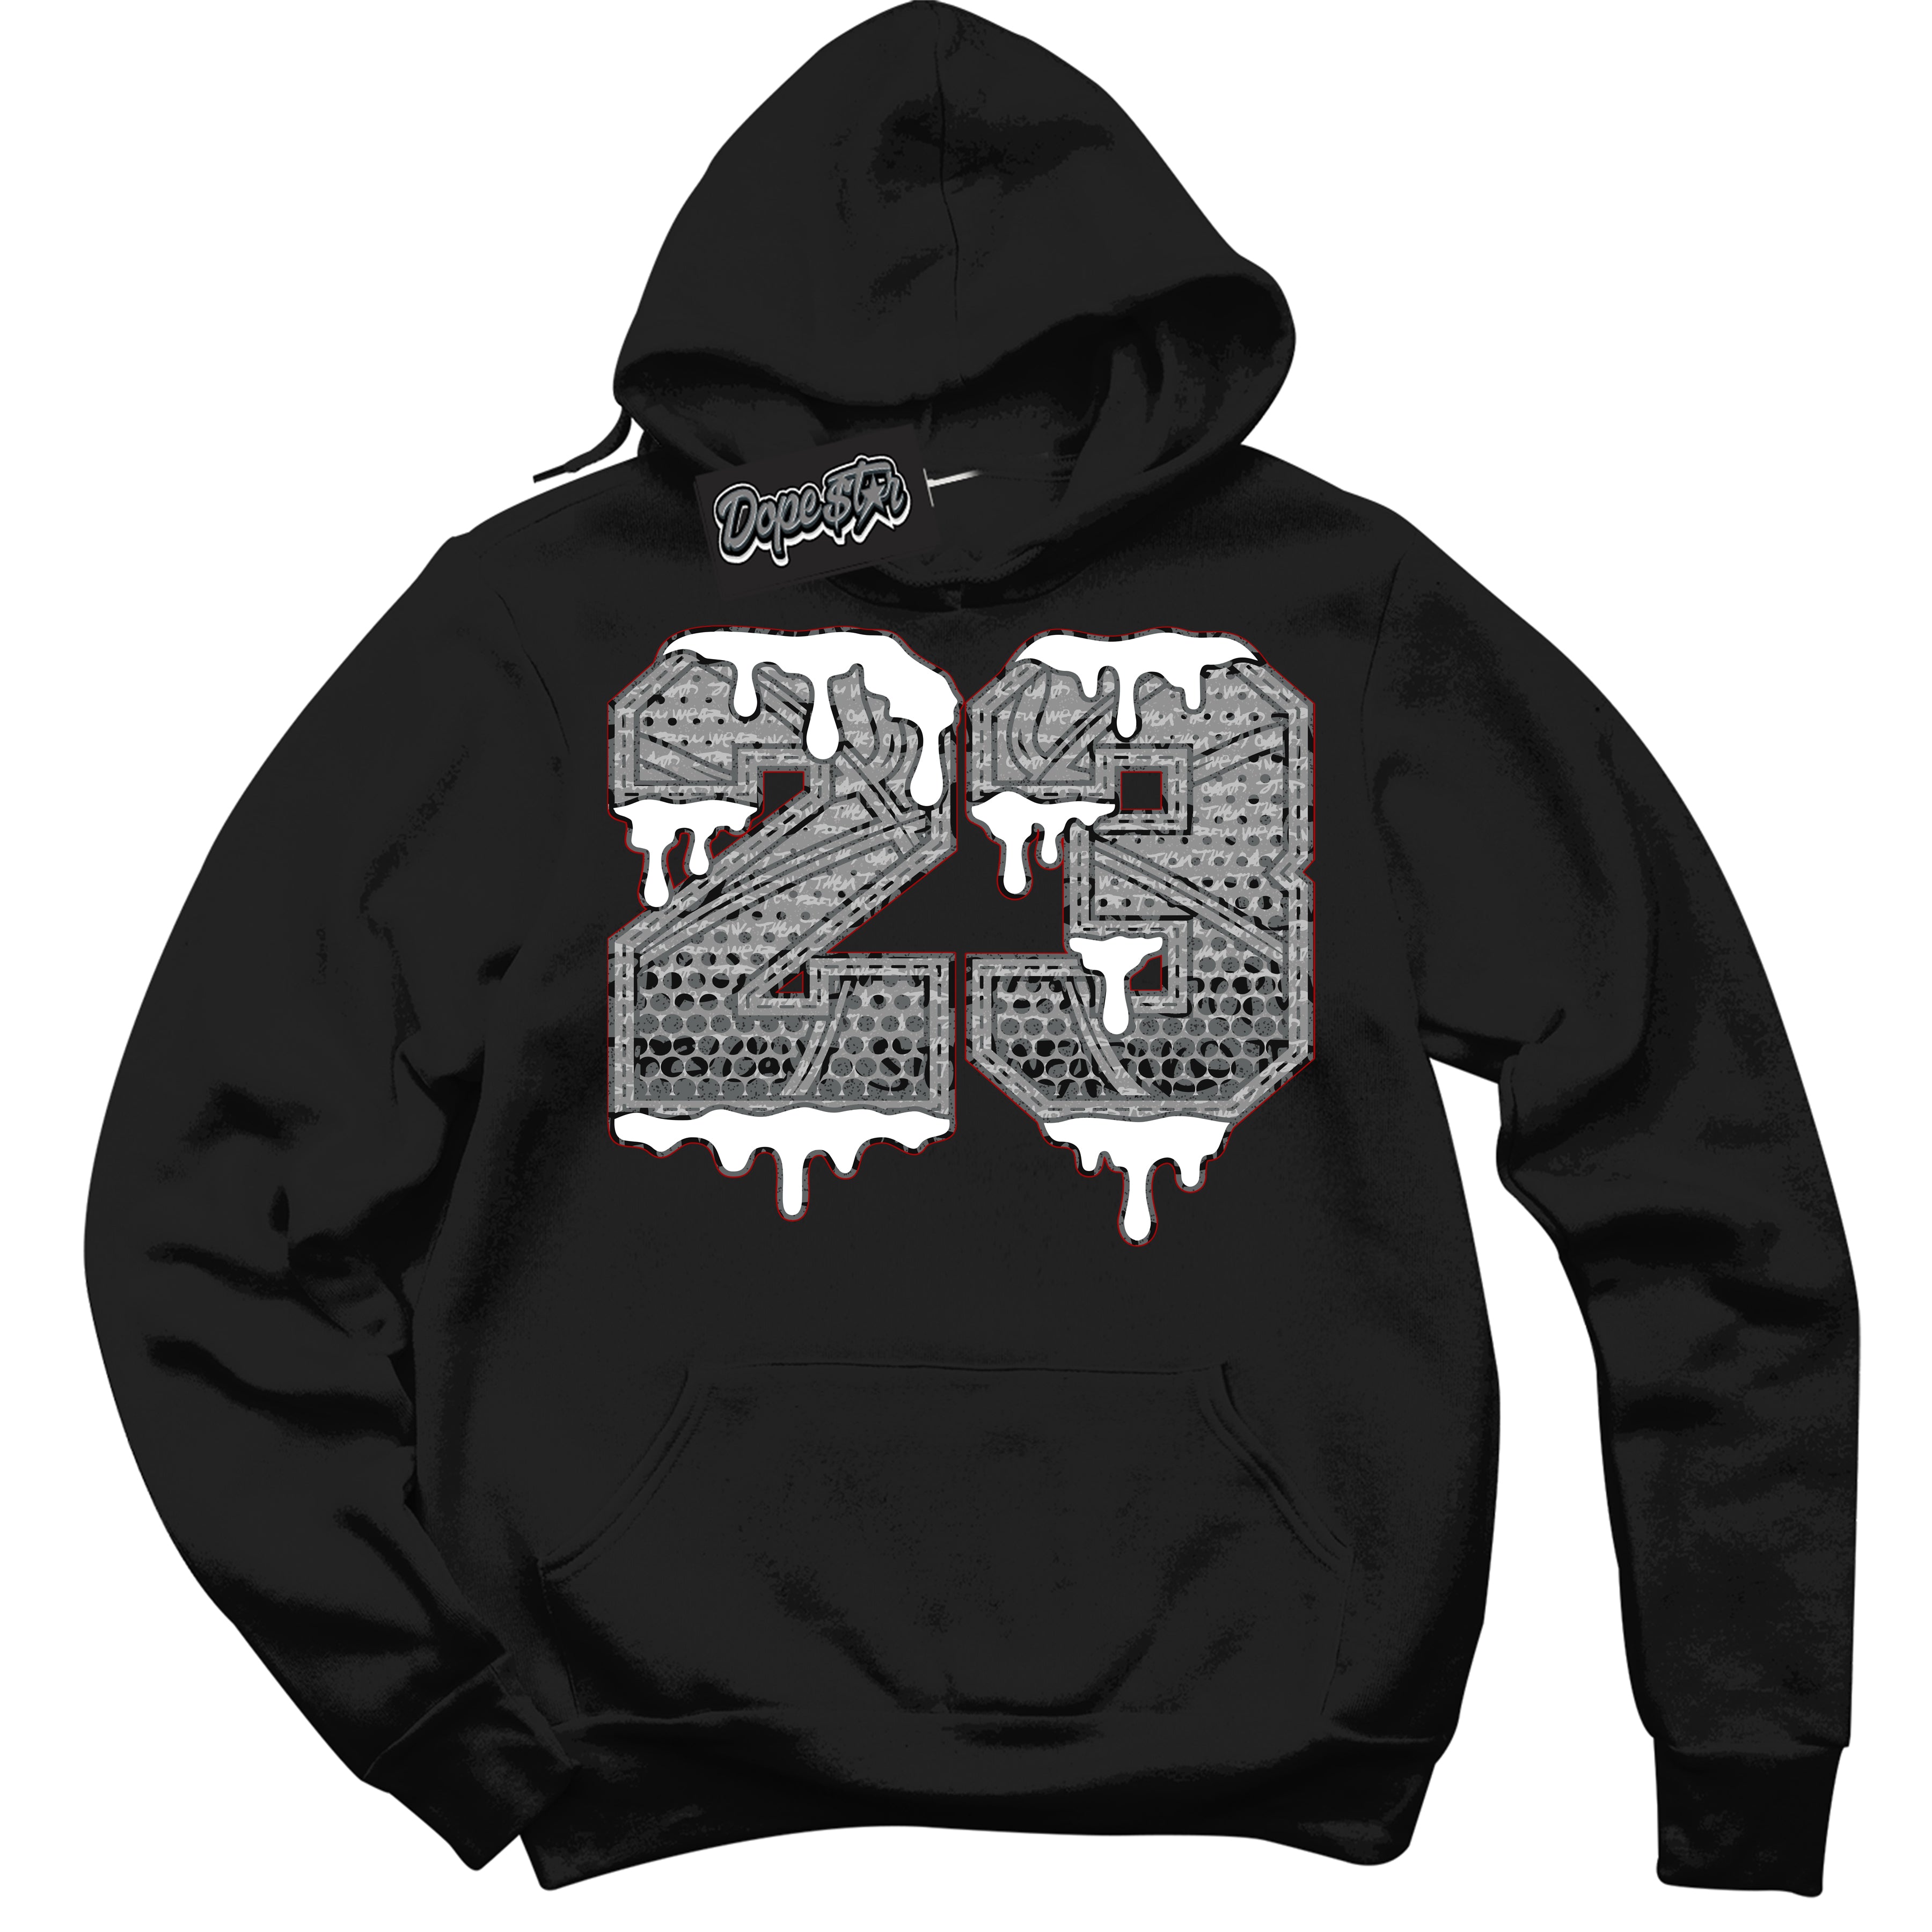 Cool Black Hoodie with “ 23 Ball ”  design that Perfectly Matches Rebellionaire 1s Sneakers.